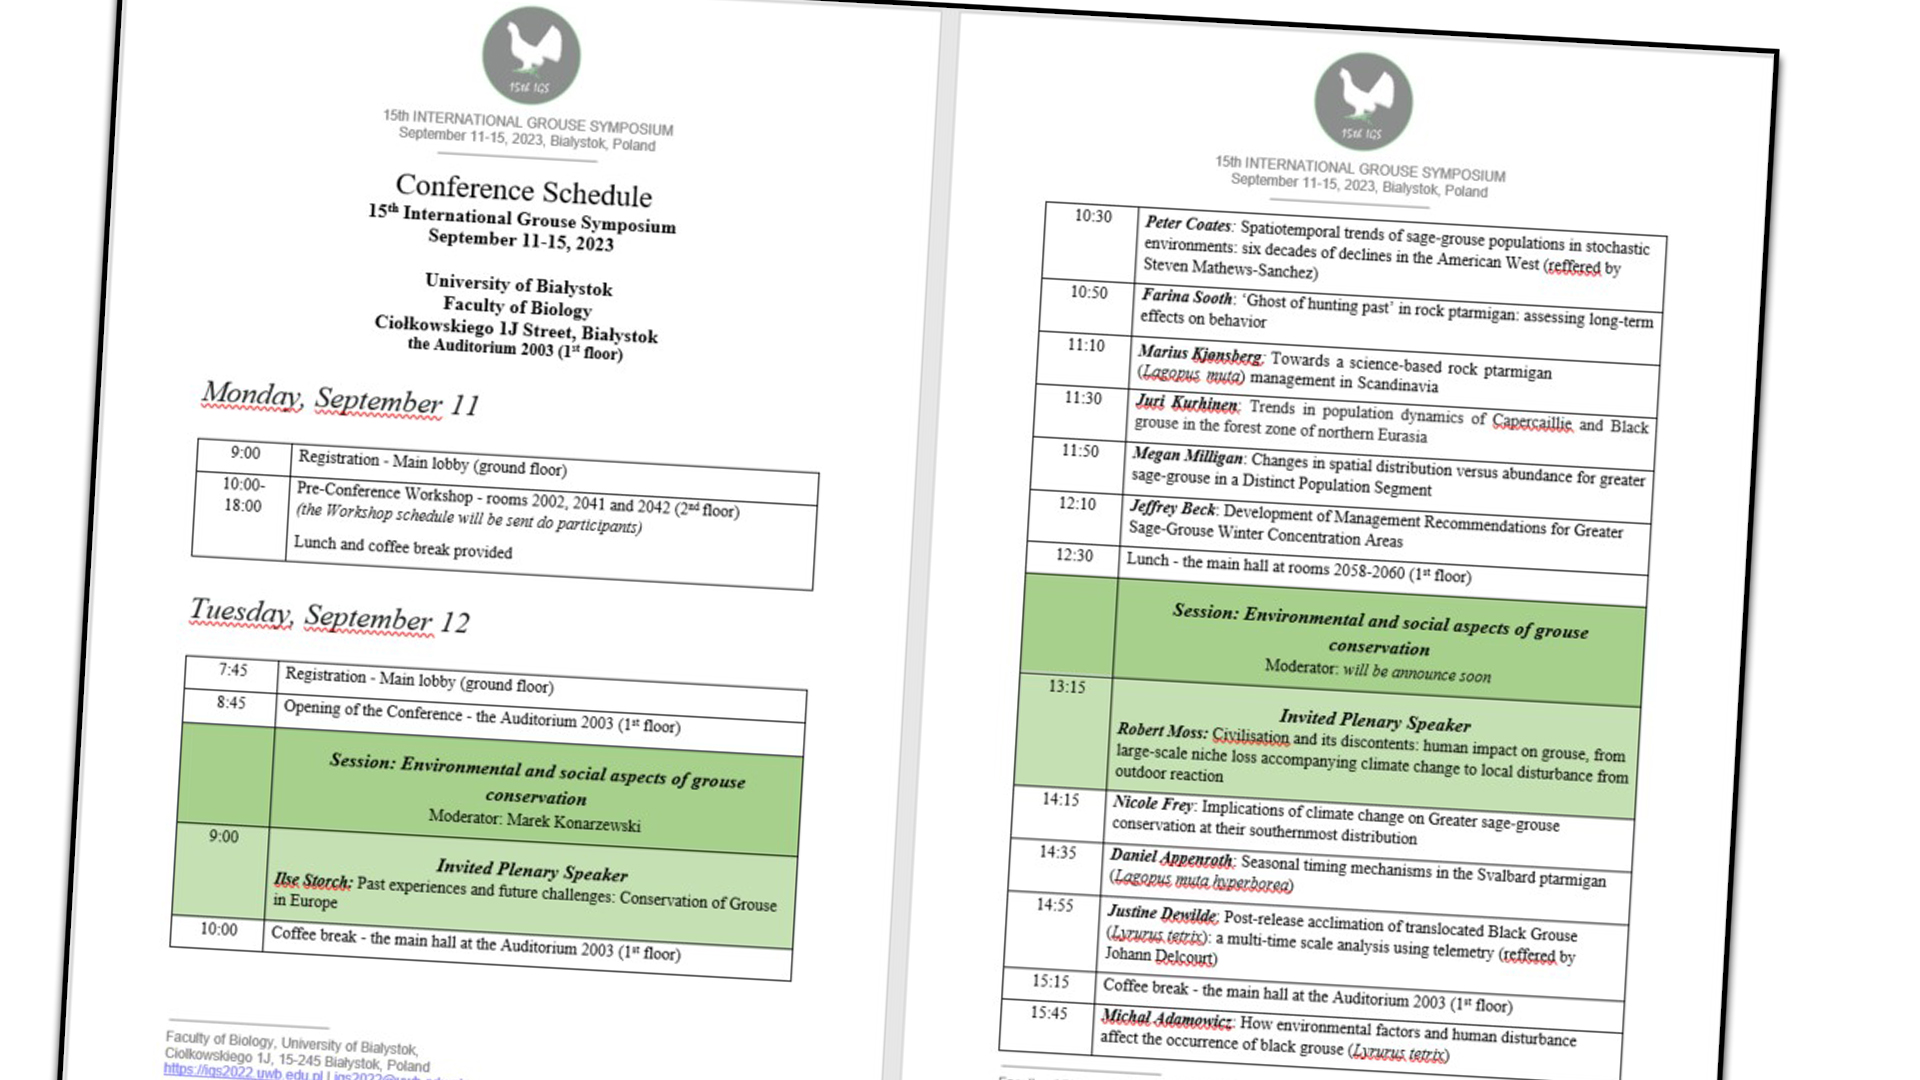 Conference Schedule 15th International Grouse Symposium September 11-15, 2023